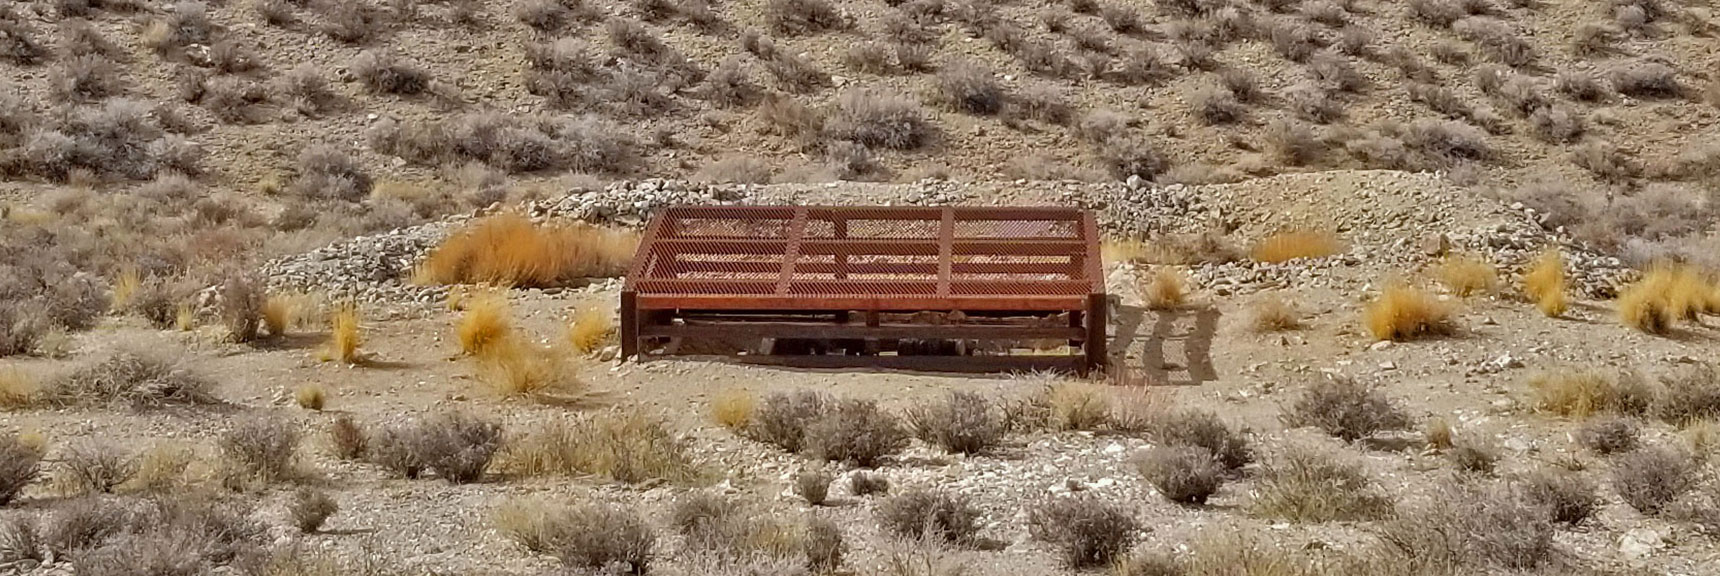 Deep Vertical Mine Shaft Closed Off | Skidoo Stamp Mill, Panamint Mountains, Death Valley National Park, CA